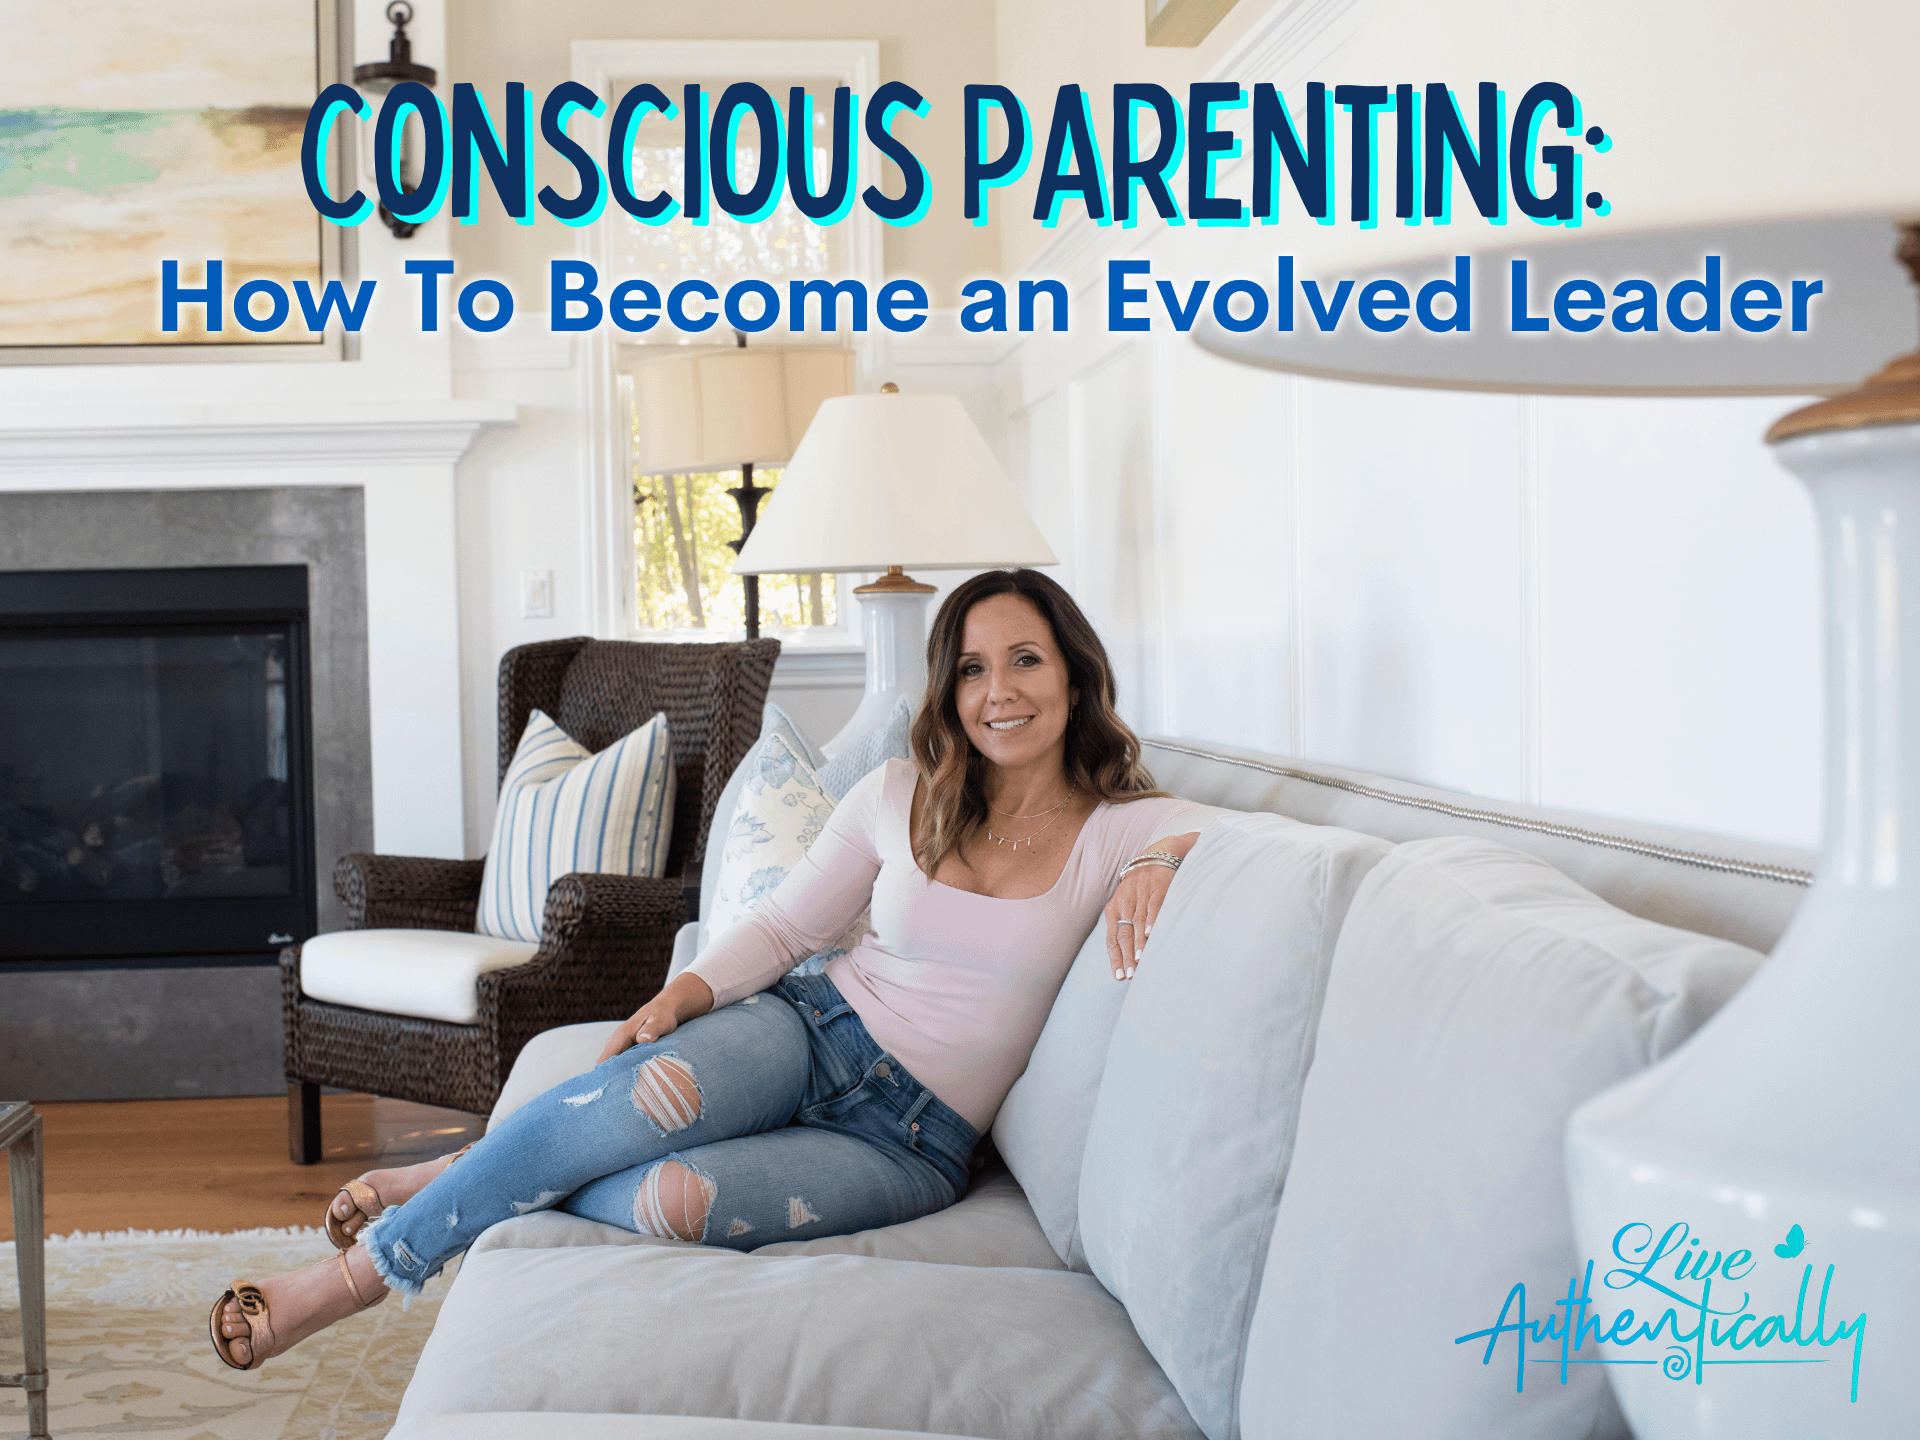 Conscious Parenting How To Become an Evolved Leader